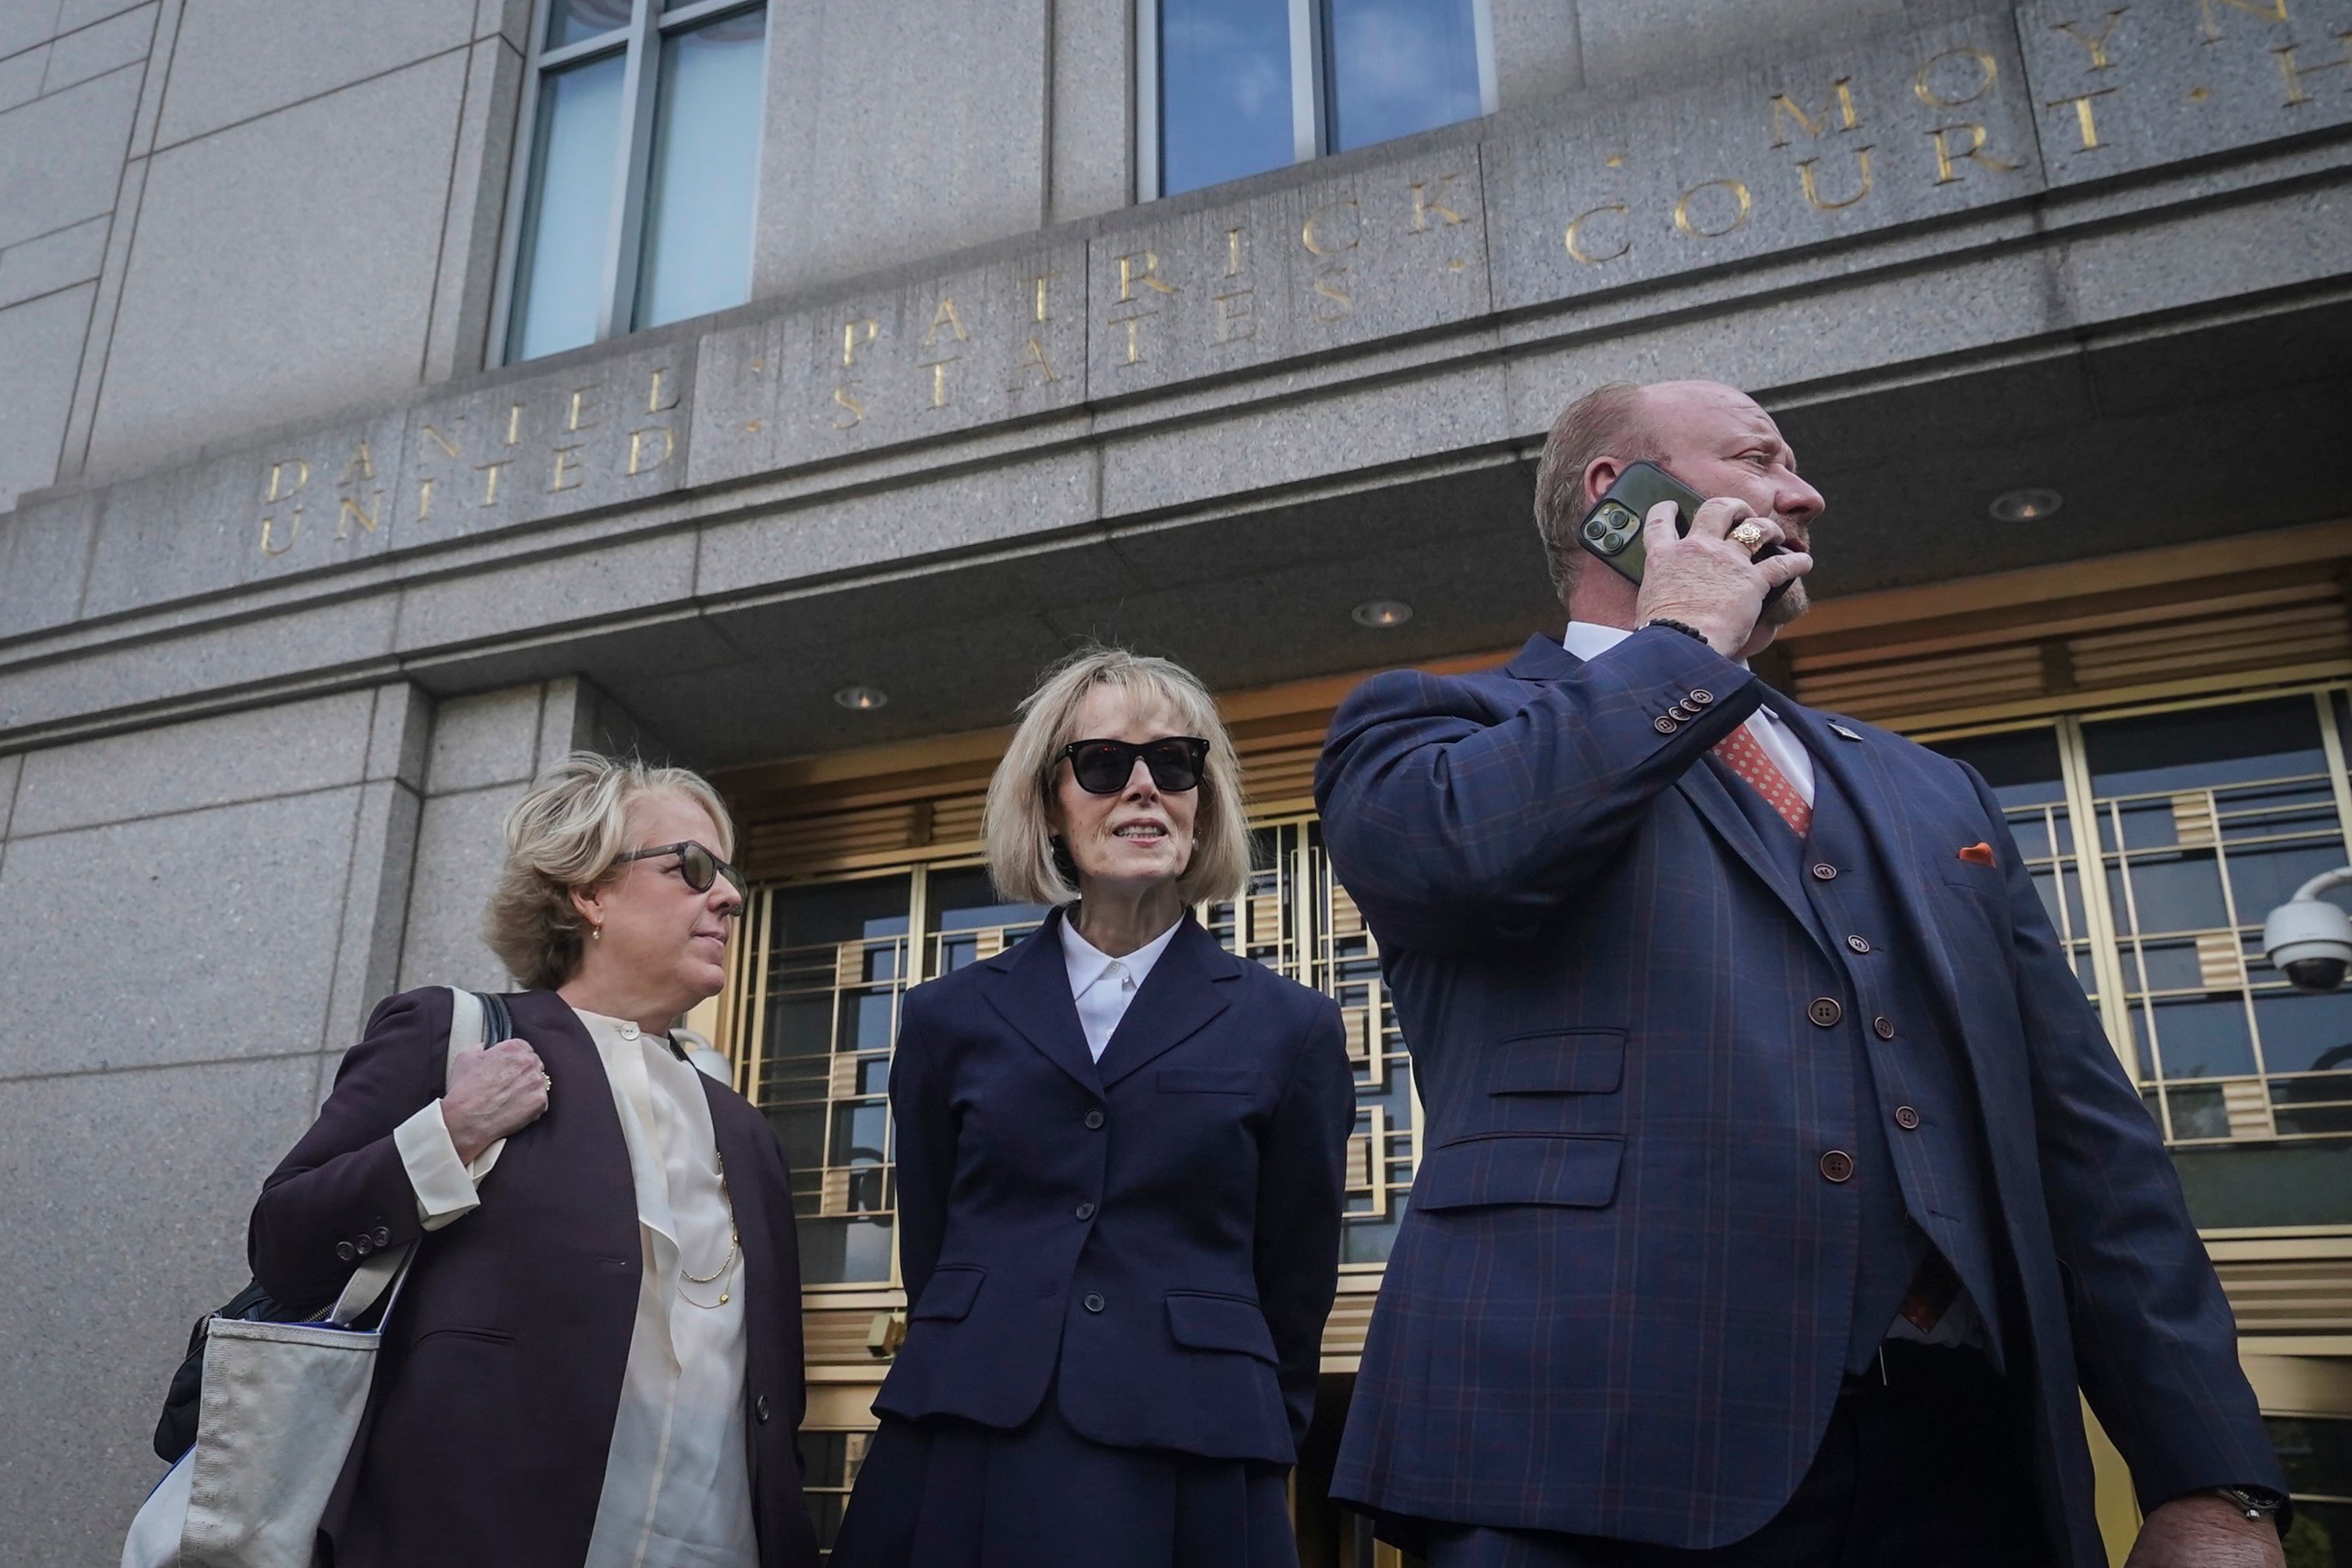 Former advice columnist E. Jean Carroll, center, leaves federal court with members of her legal team, after testifying in her rape trial against former President Donald Trump, Wednesday April 26, 2023, in New York